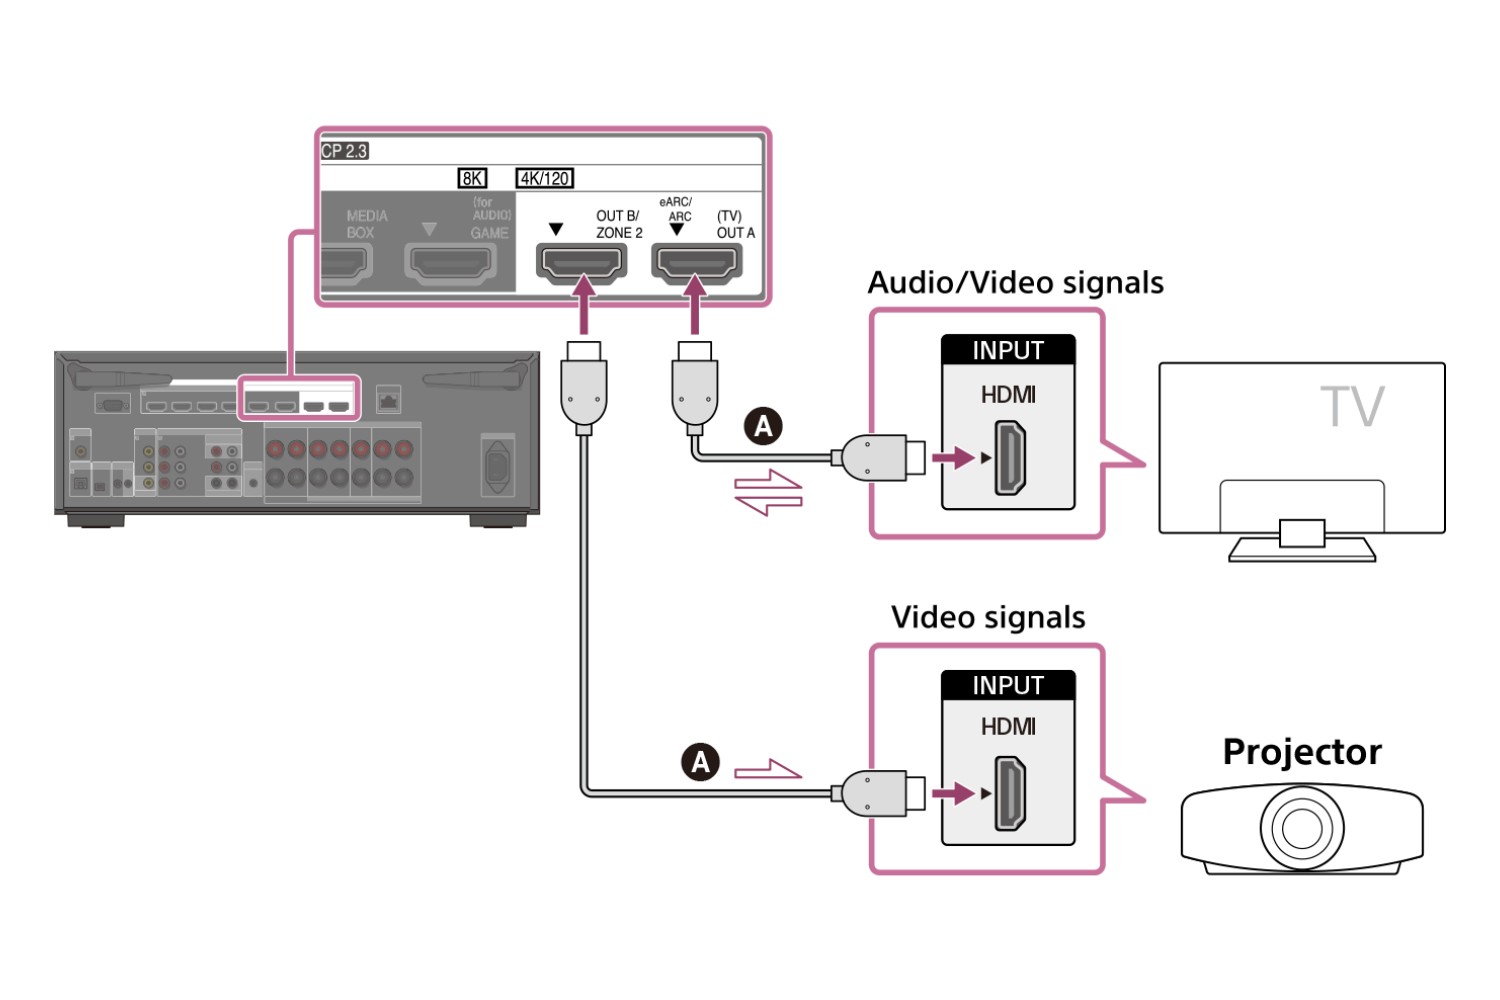 How To Connect TV And Projector To An AV Receiver